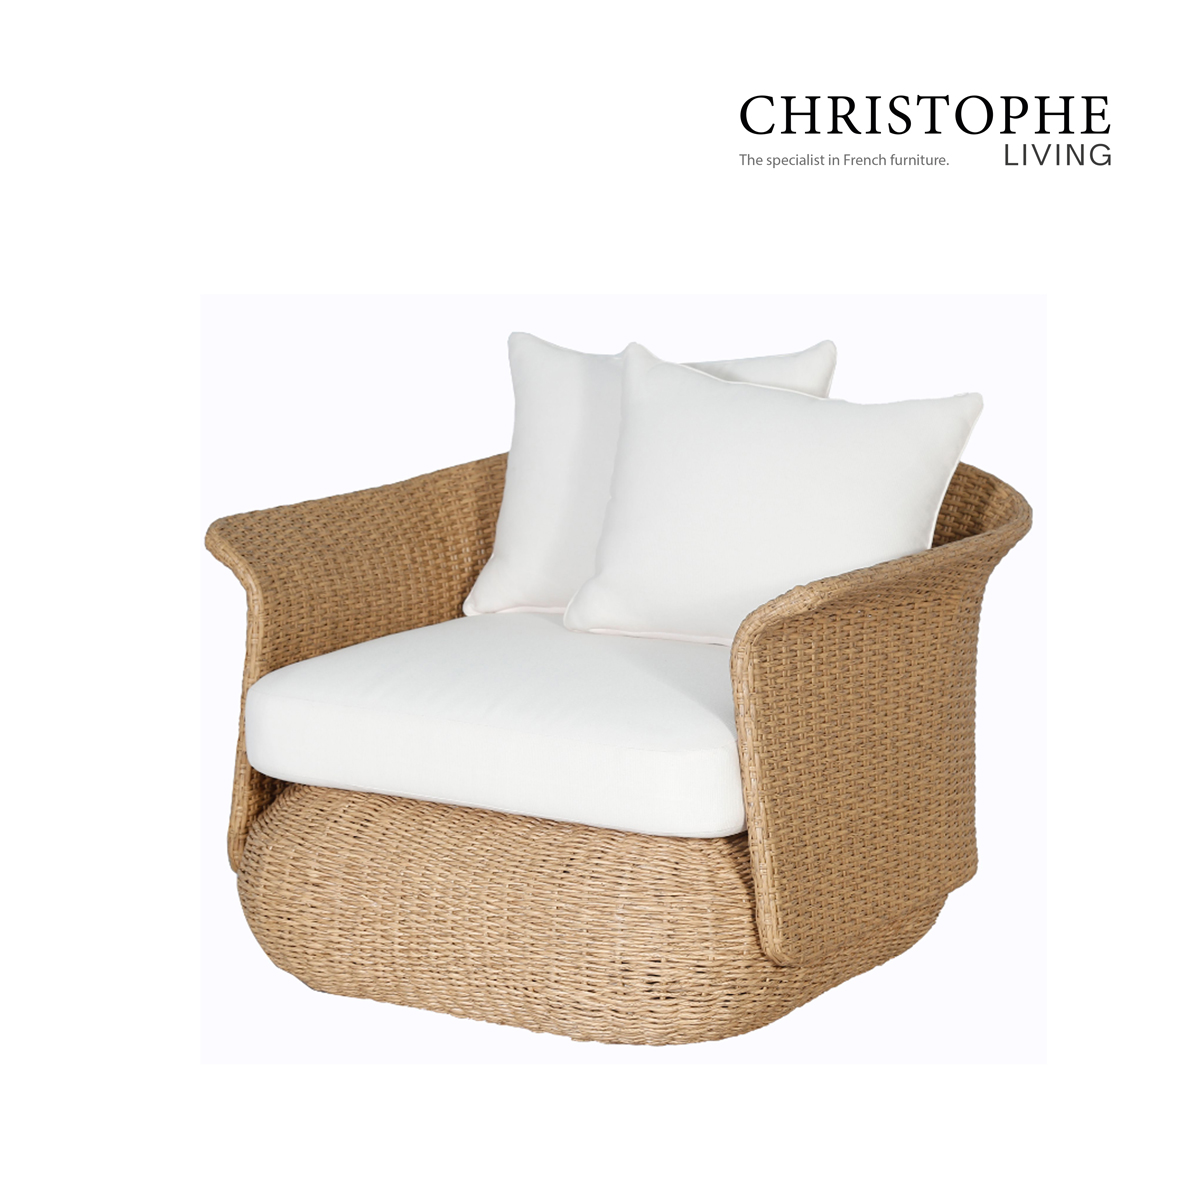 The Whitsundays Transitional Outdoor Patio Lounge Chair in Natural Wicker and Synthetic Rattan